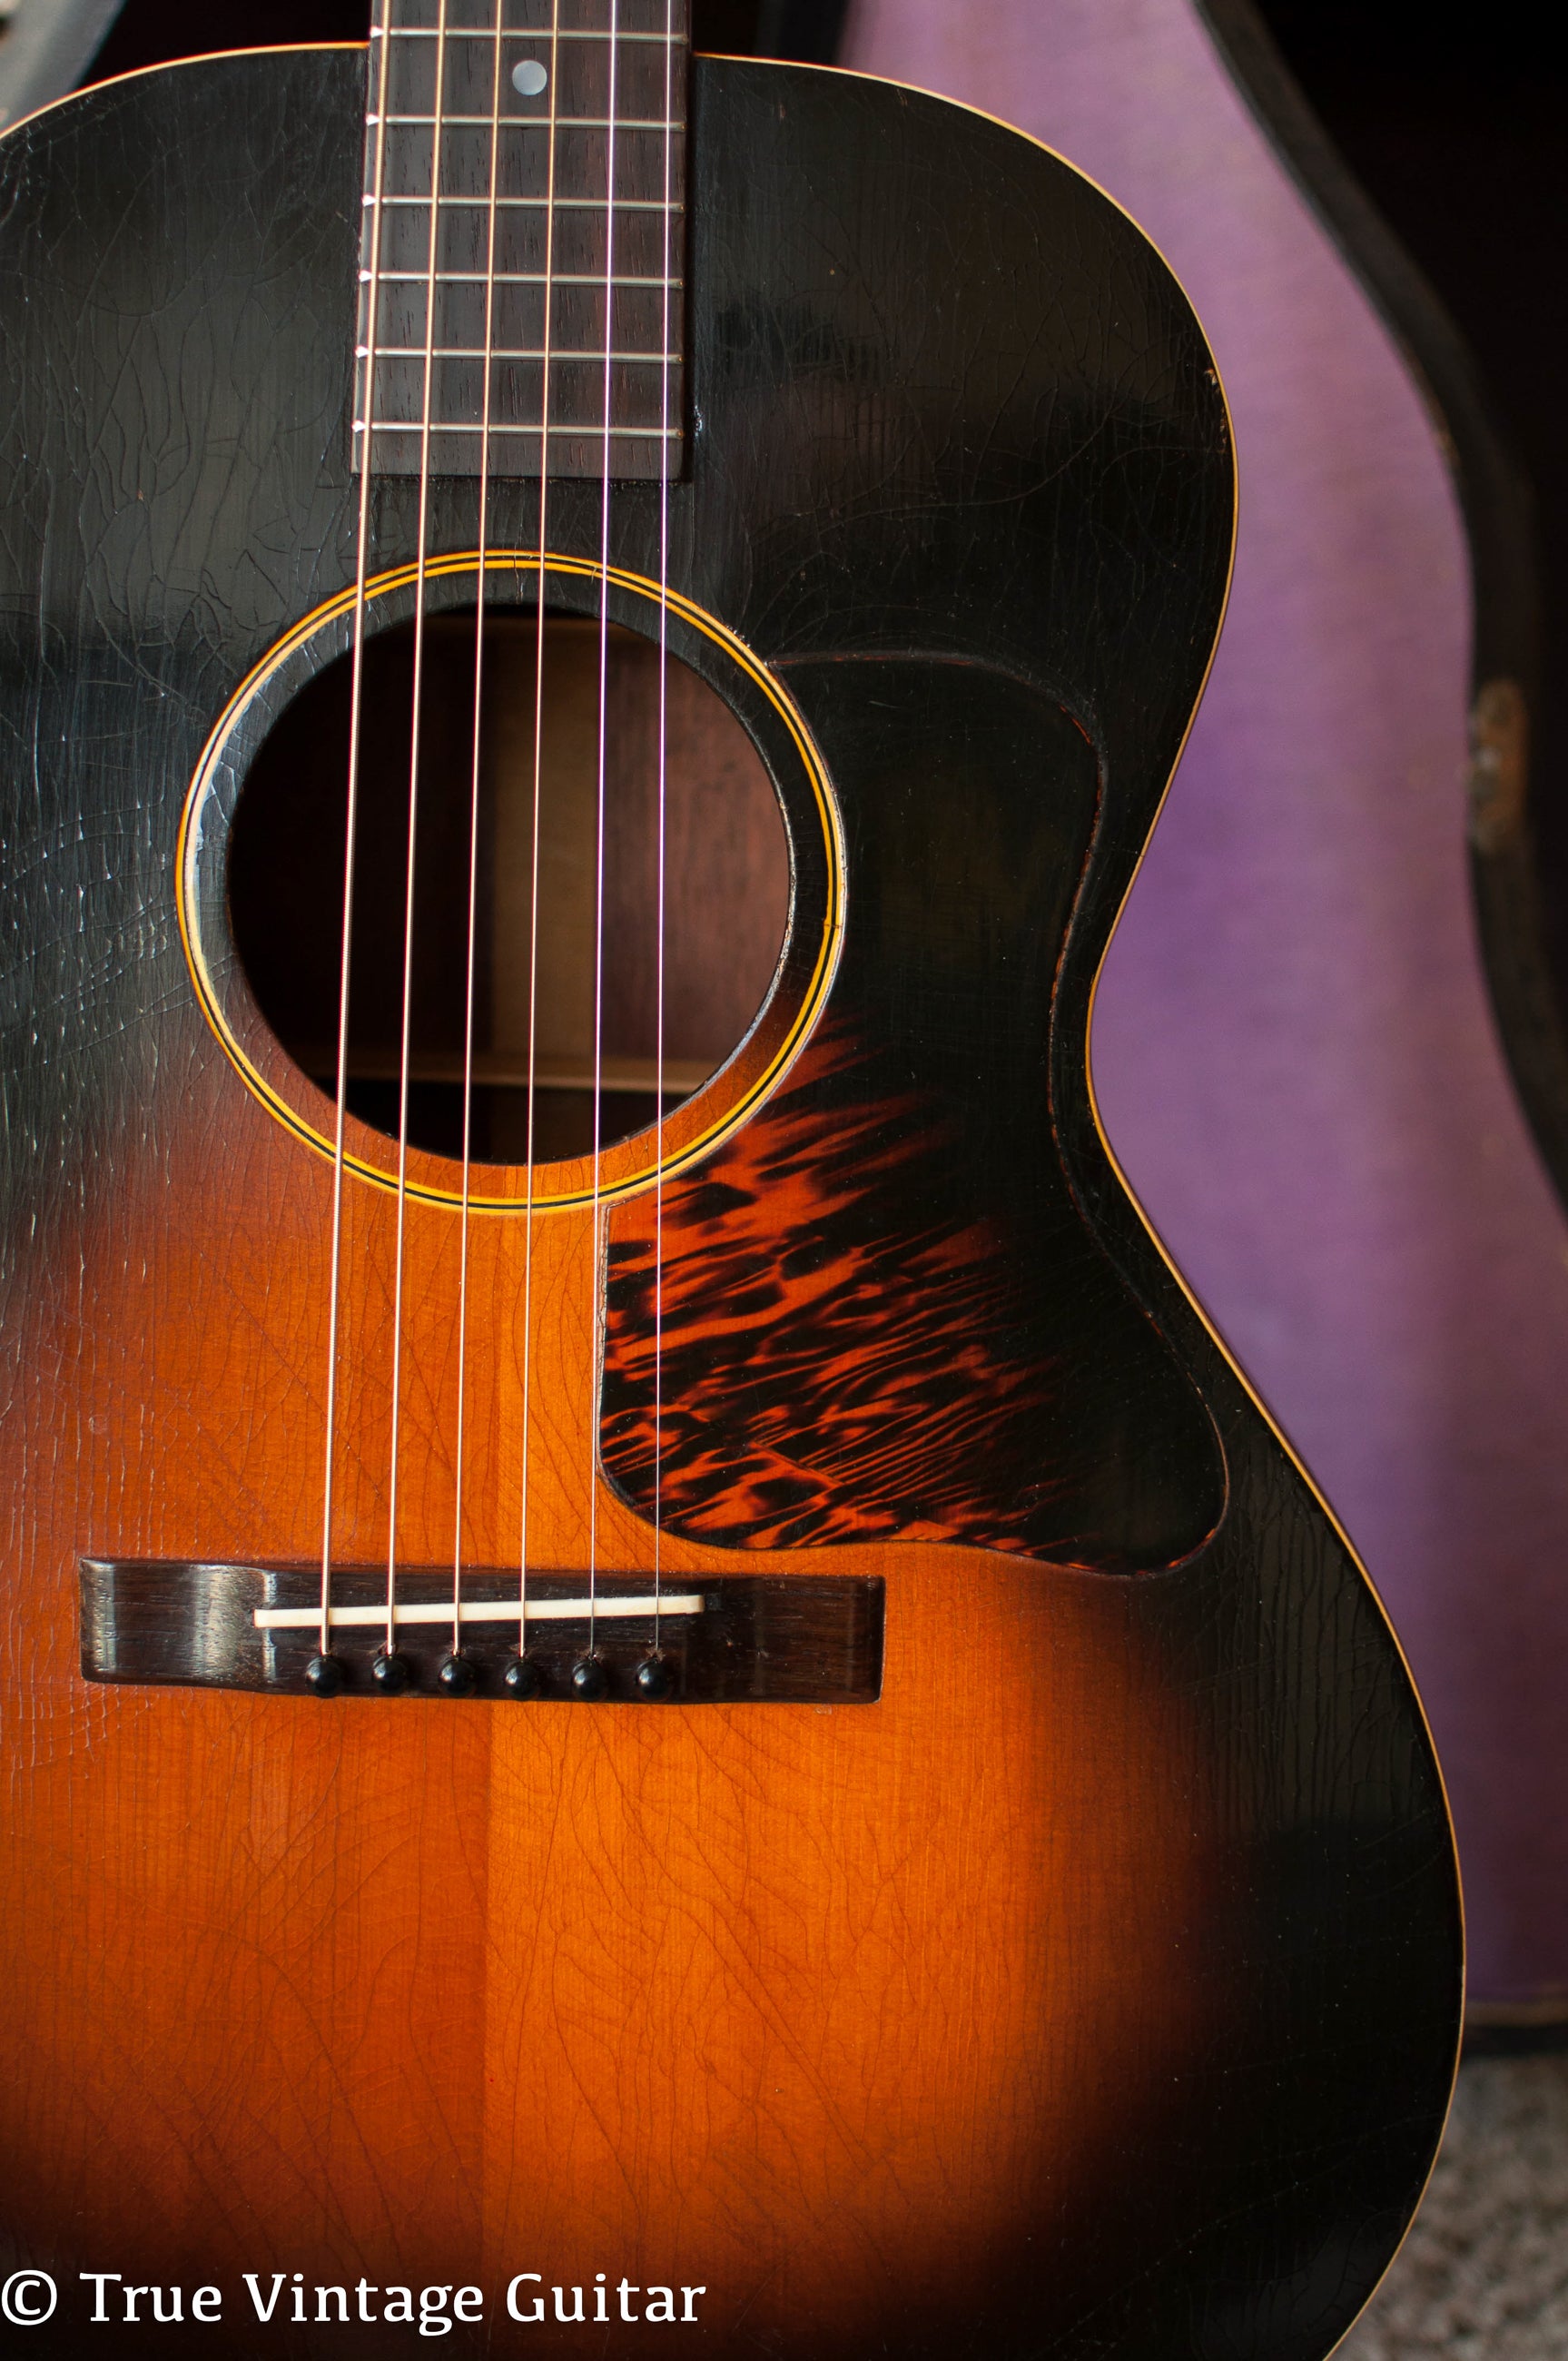 How to date vintage Gibson acoustic guitar